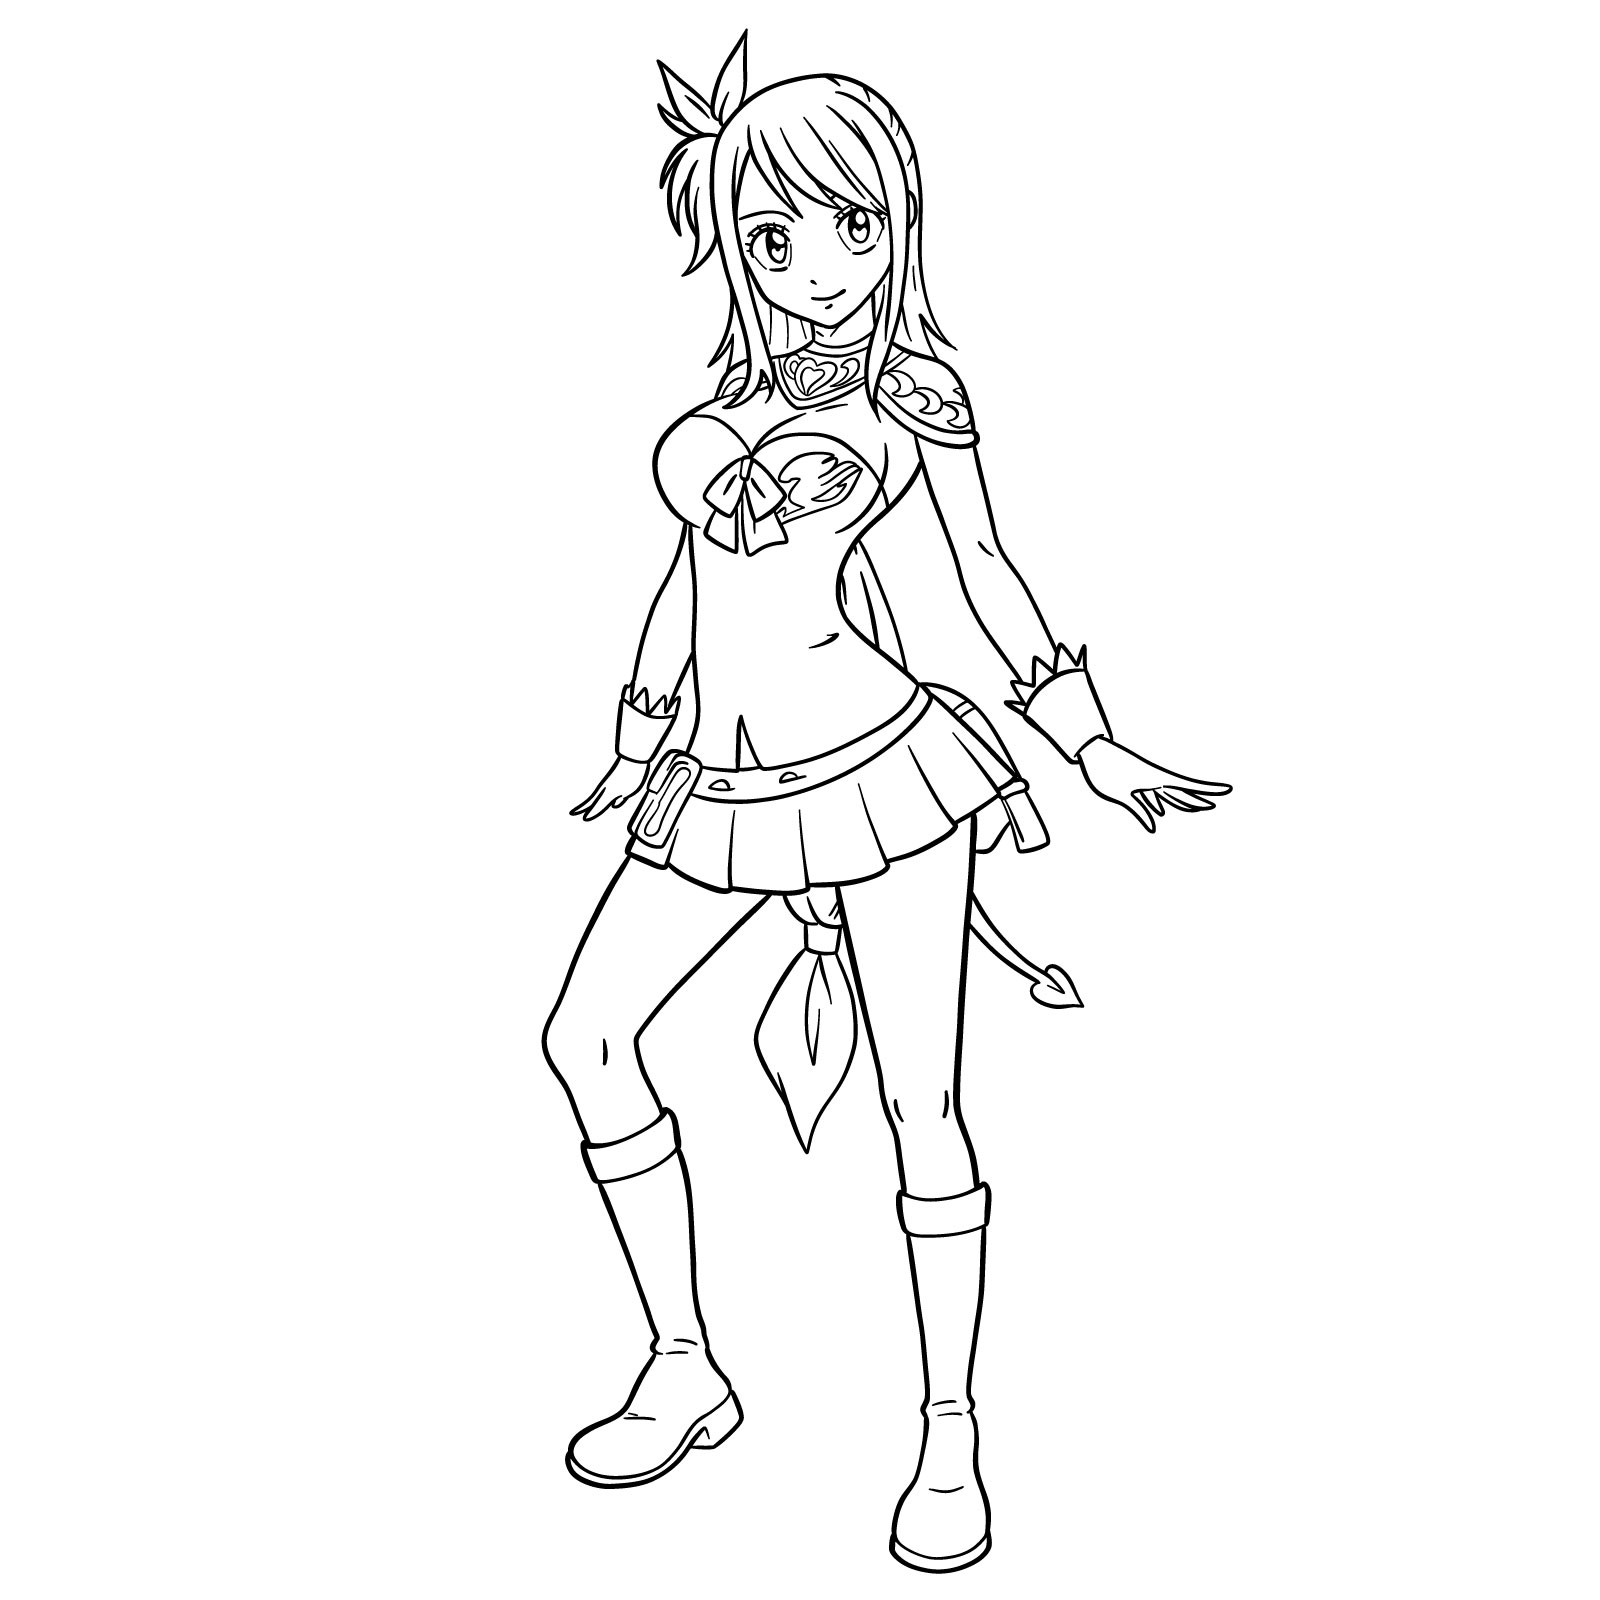 How to draw Lucy Heartfilia in a new outfit - final step